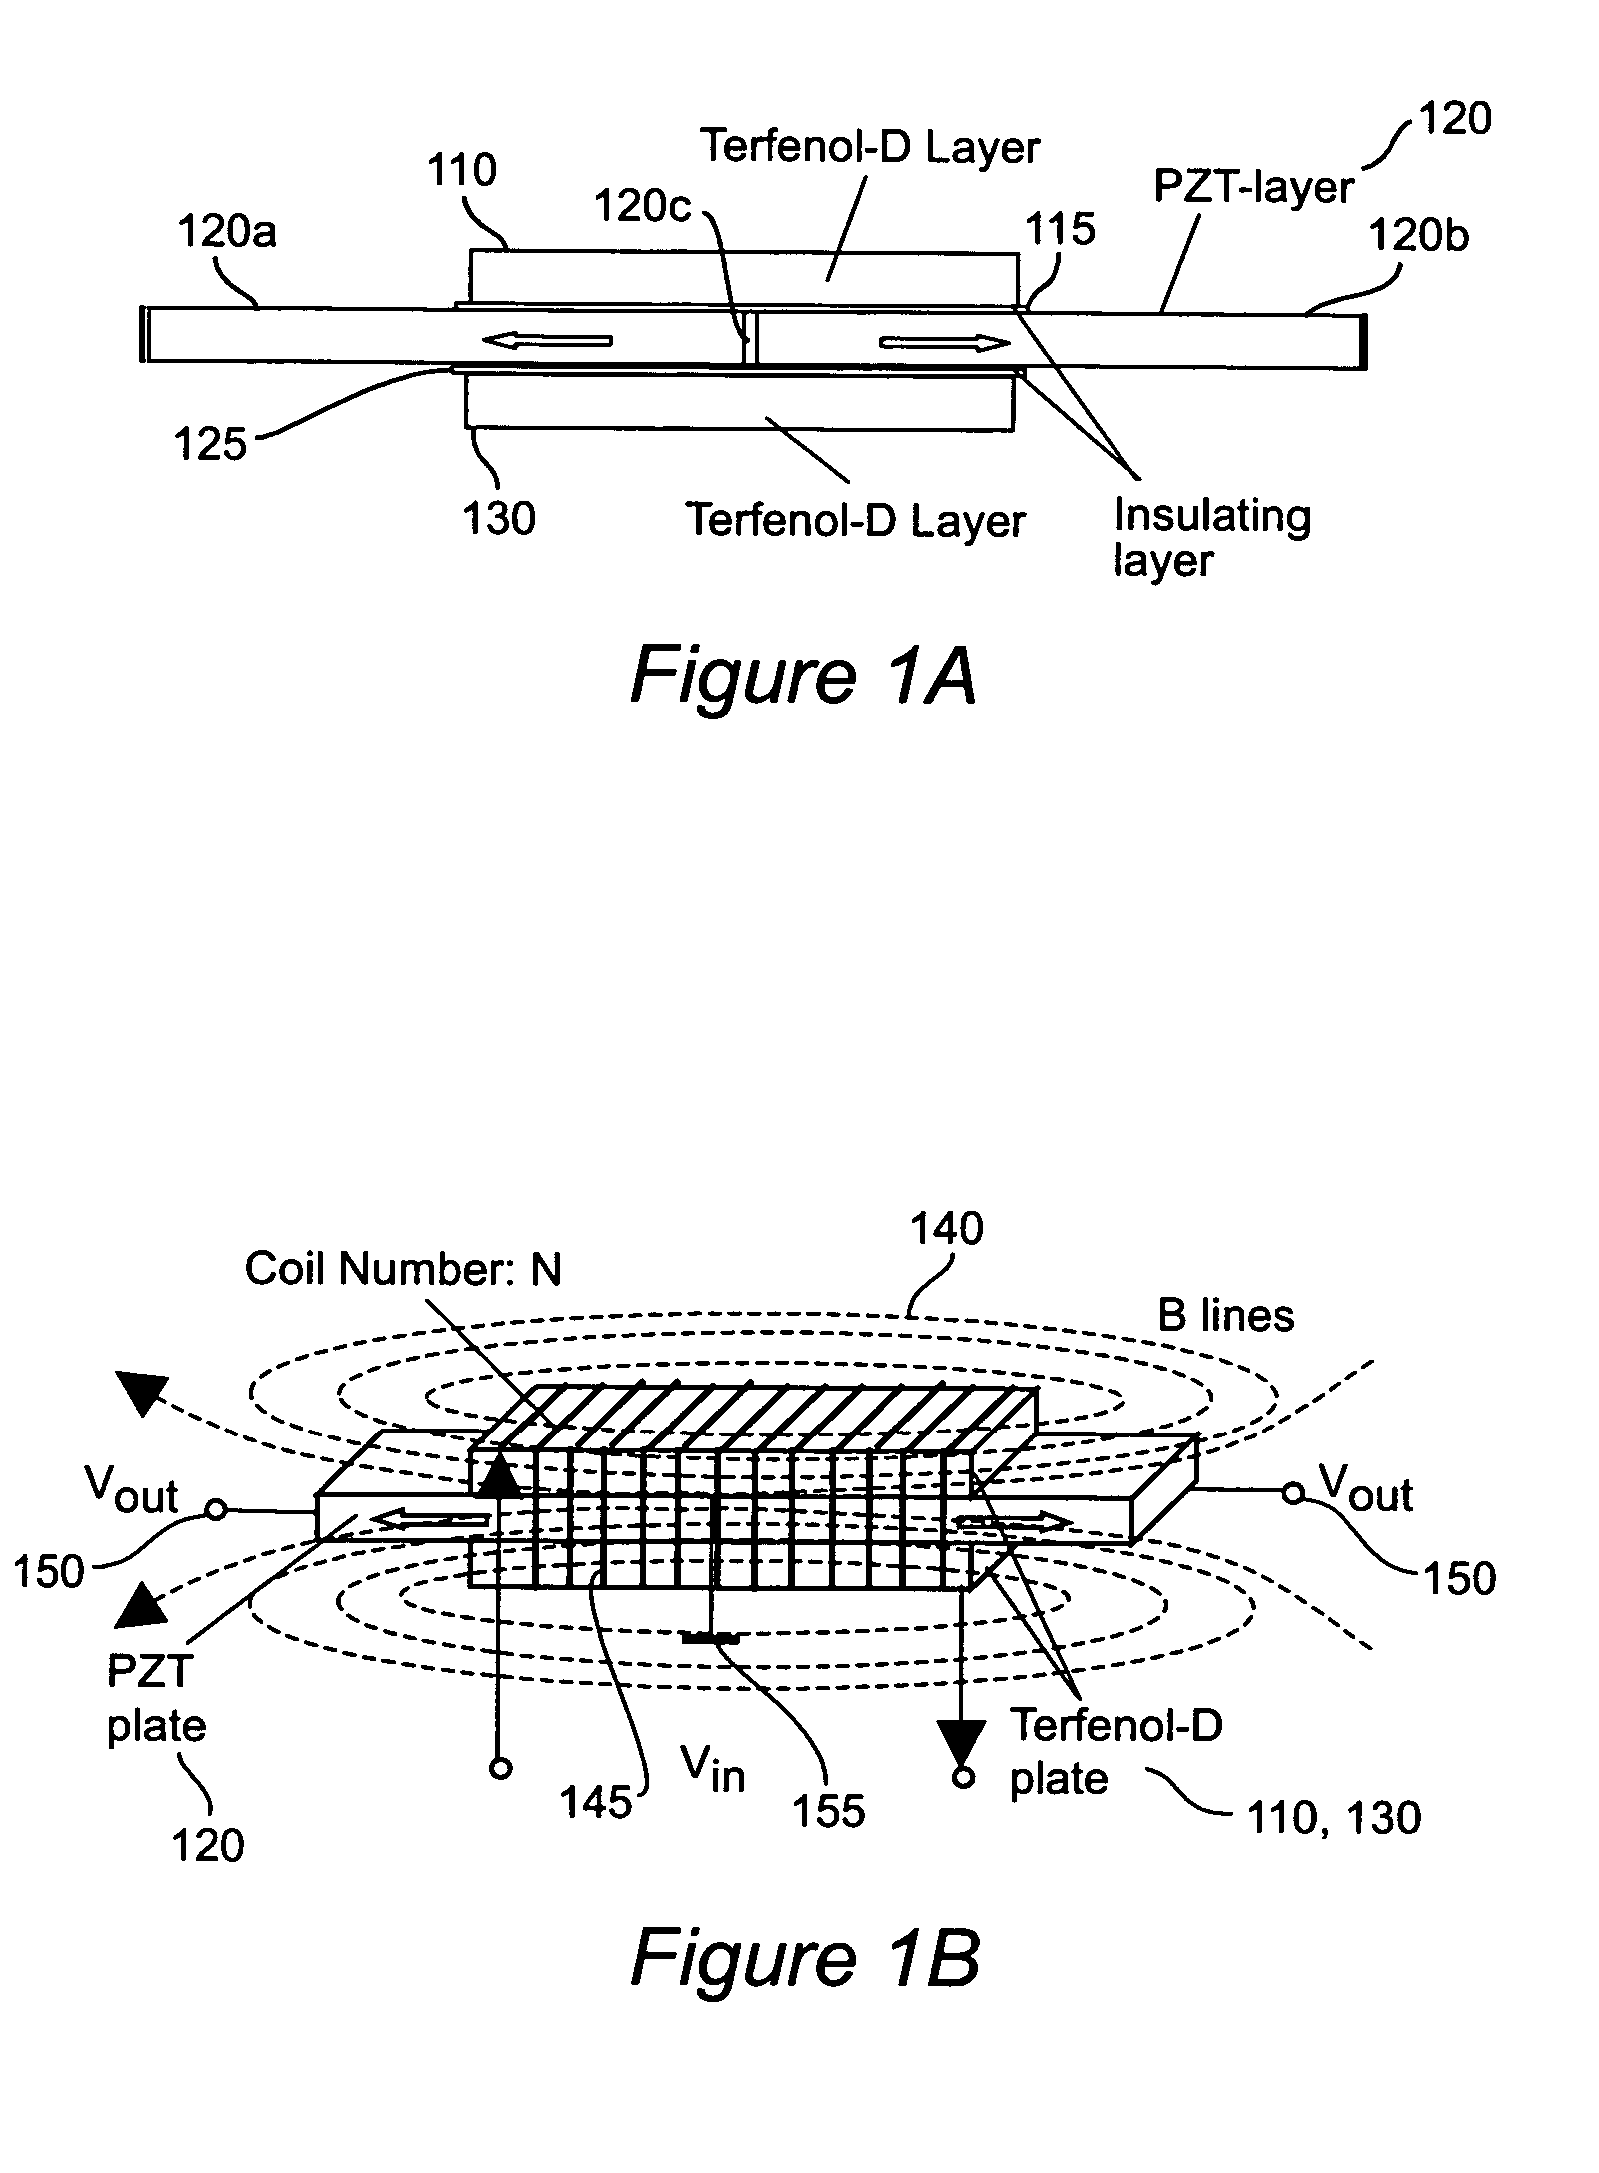 Method and apparatus for high voltage gain using a magnetostrictive-piezoelectric composite